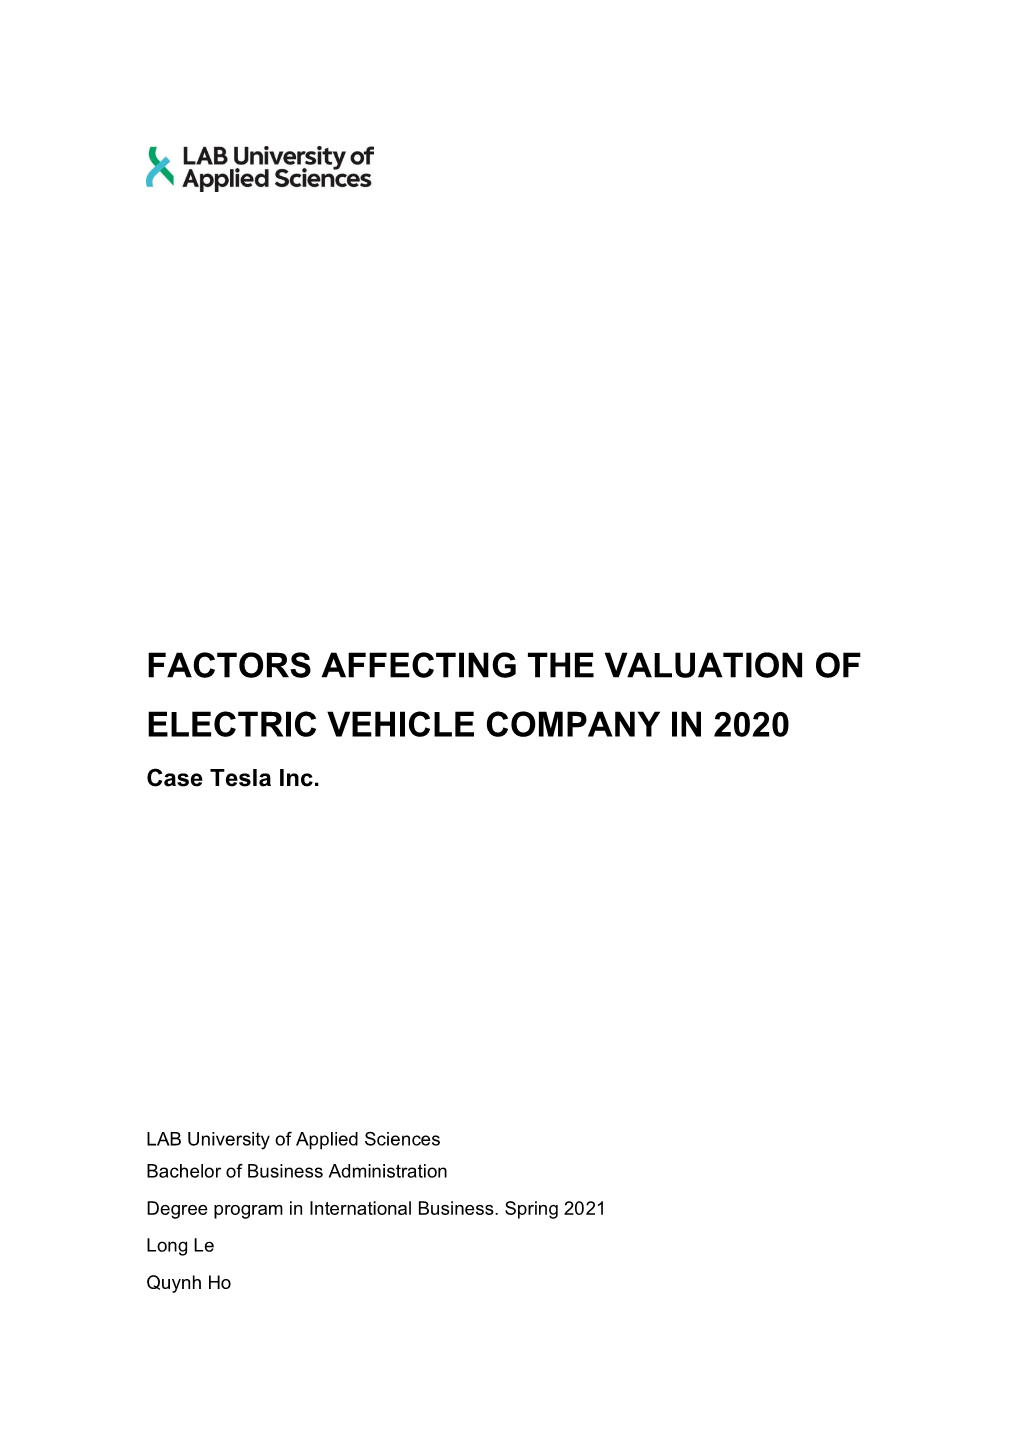 FACTORS AFFECTING the VALUATION of ELECTRIC VEHICLE COMPANY in 2020 Case Tesla Inc